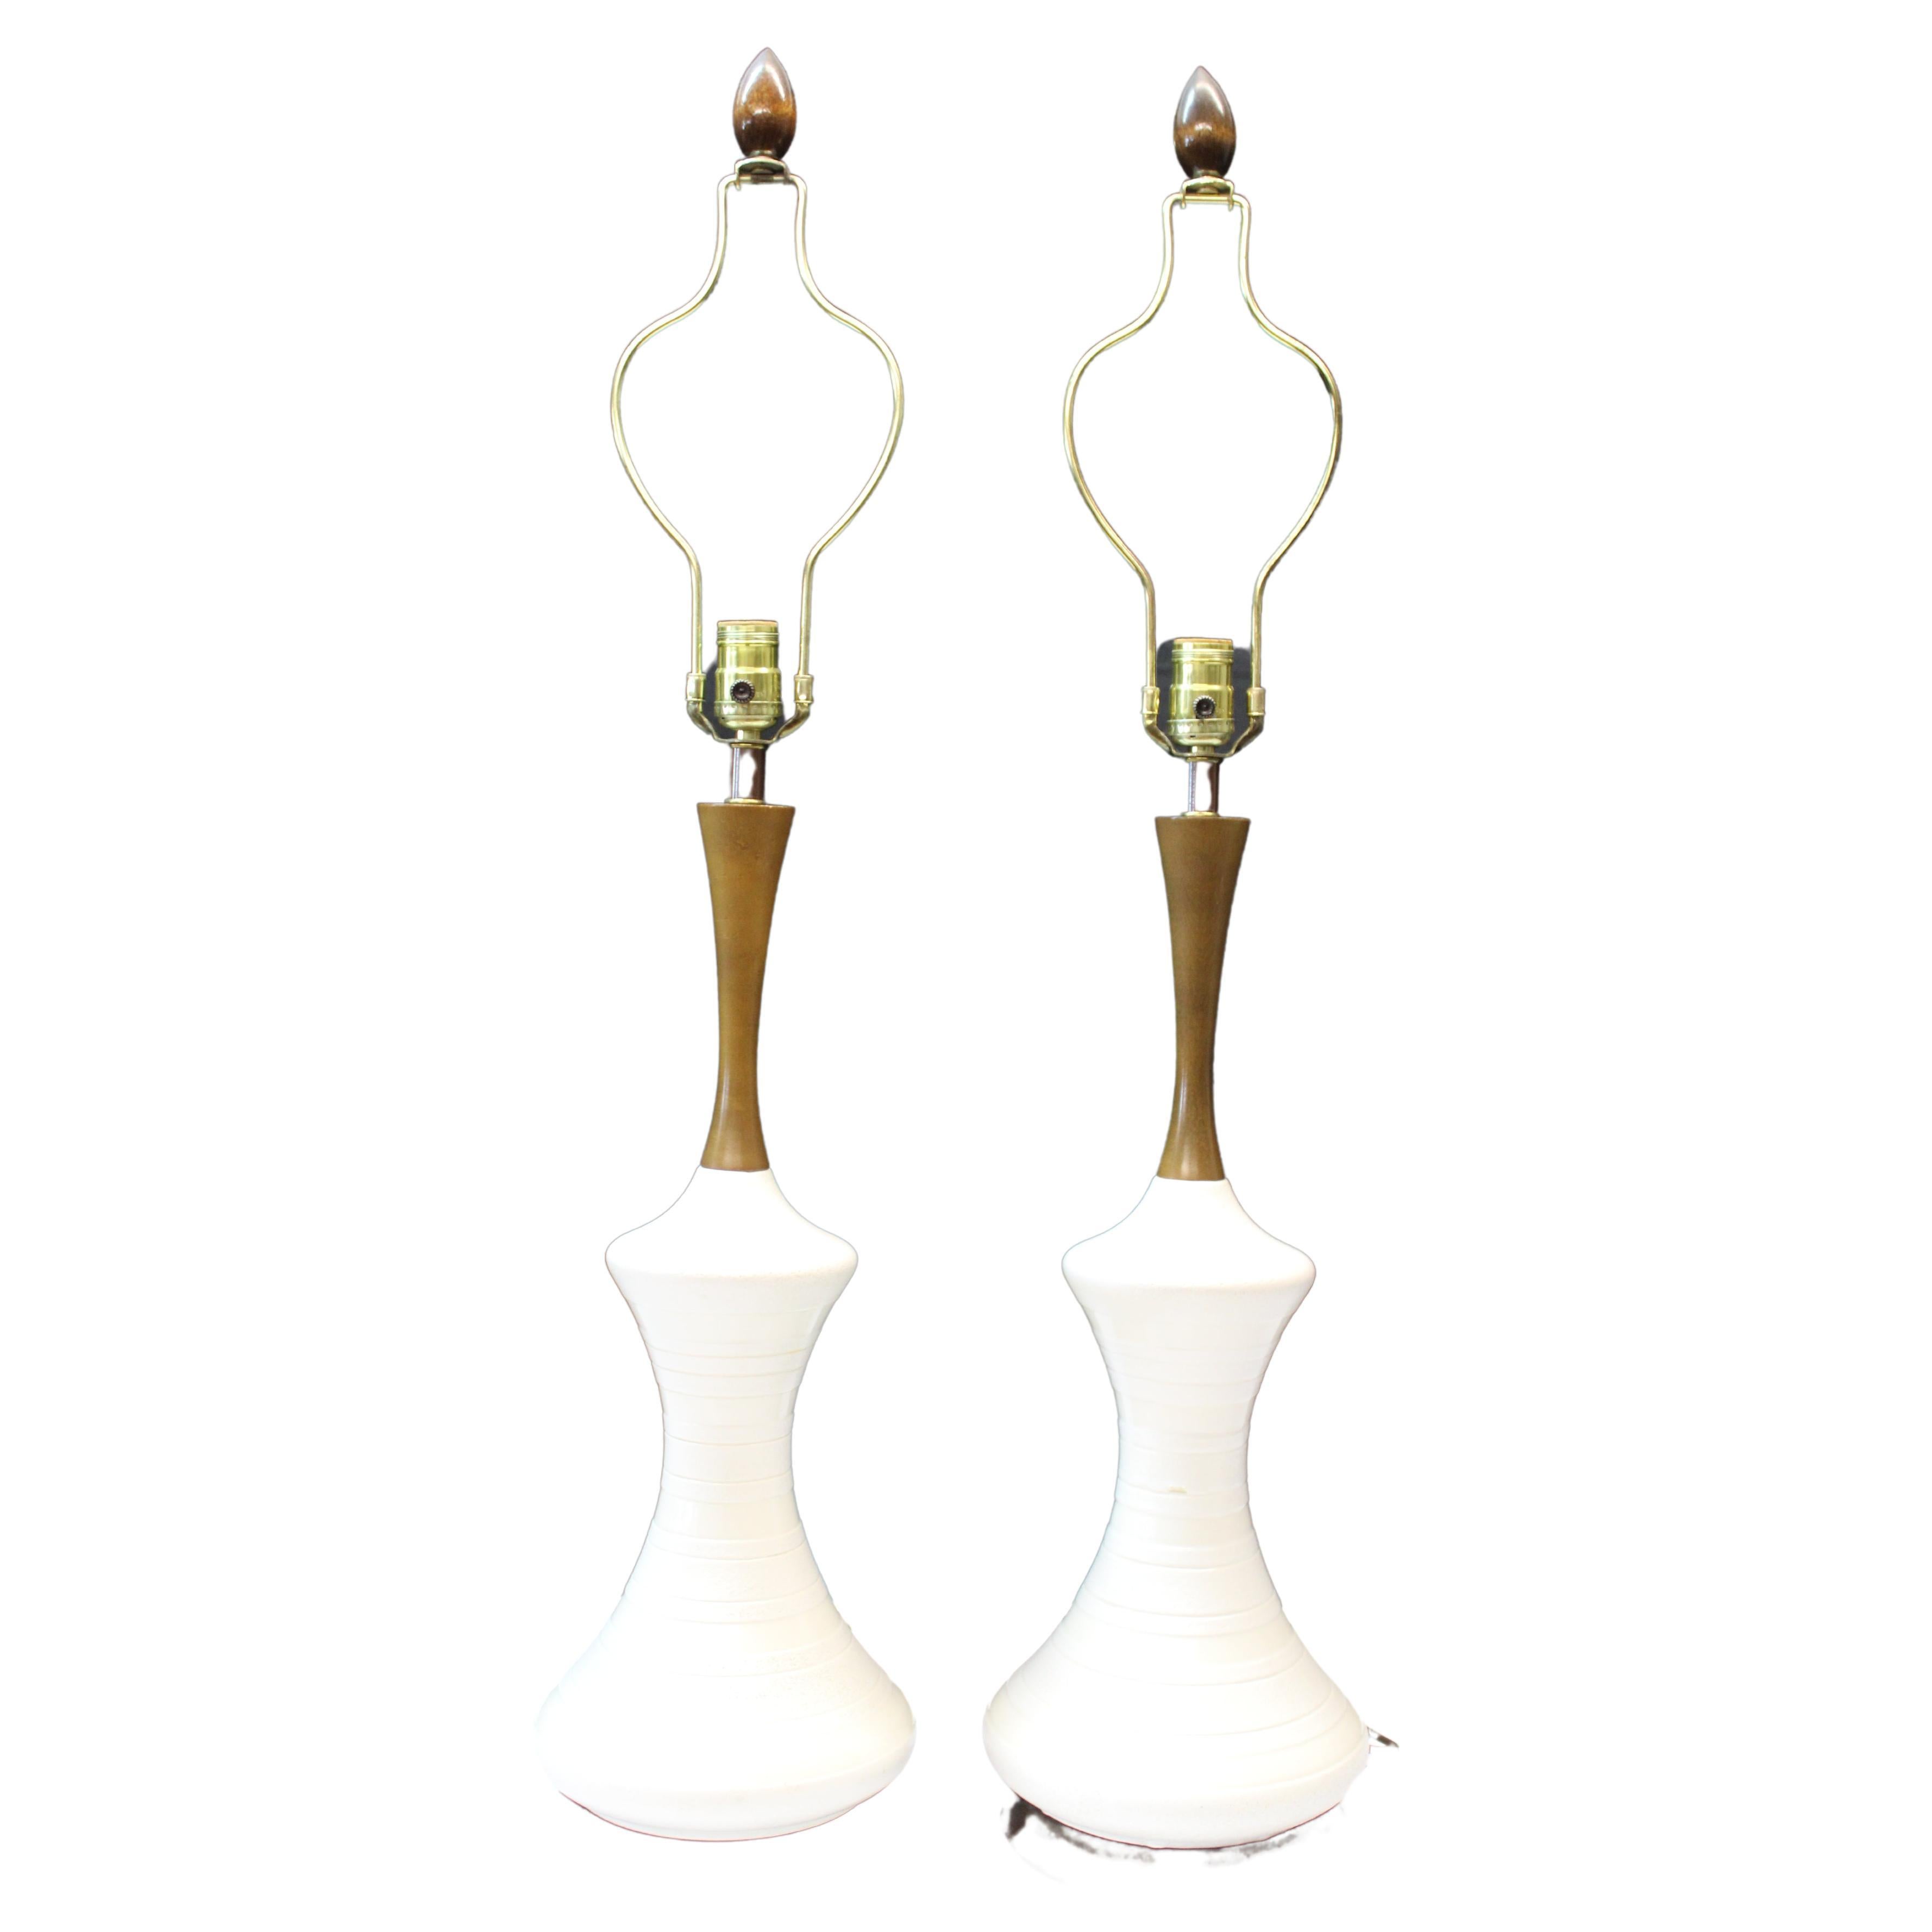 Pr Mid-Century Textured Ceramic Hourglass Shaped Lamps with Wood Finials